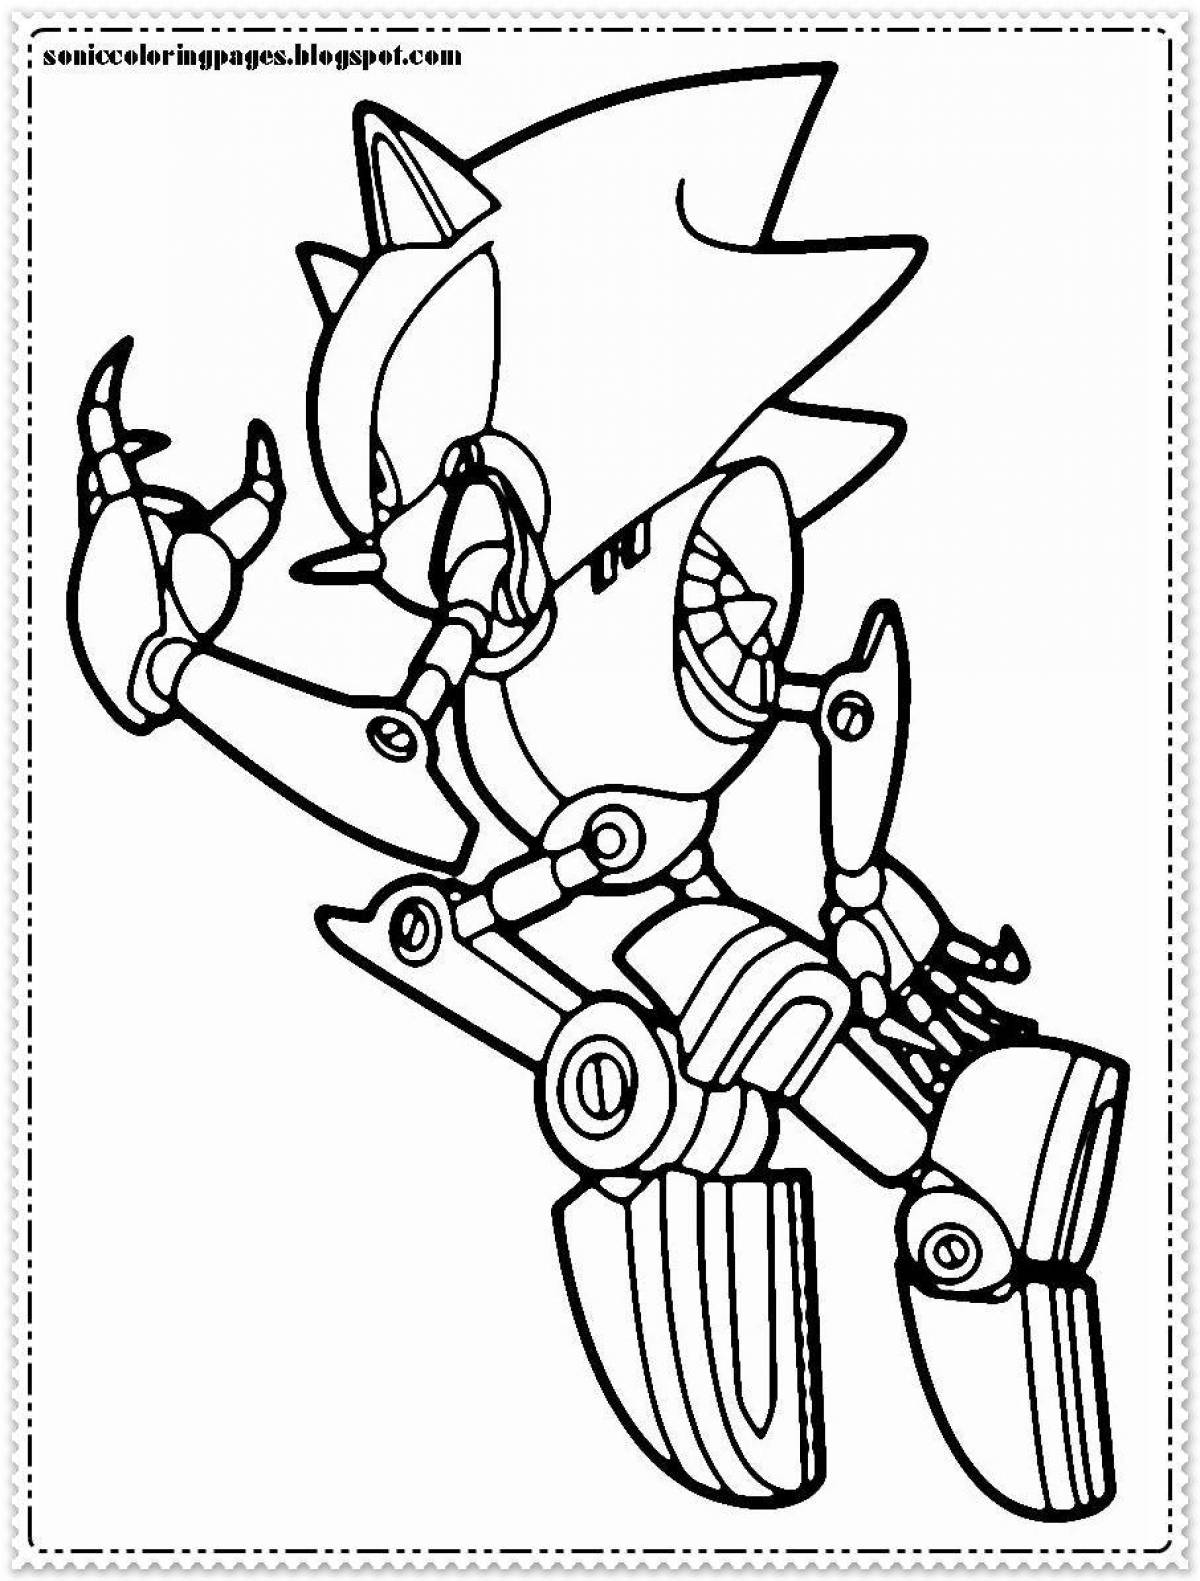 Sonic robot mysterious coloring page